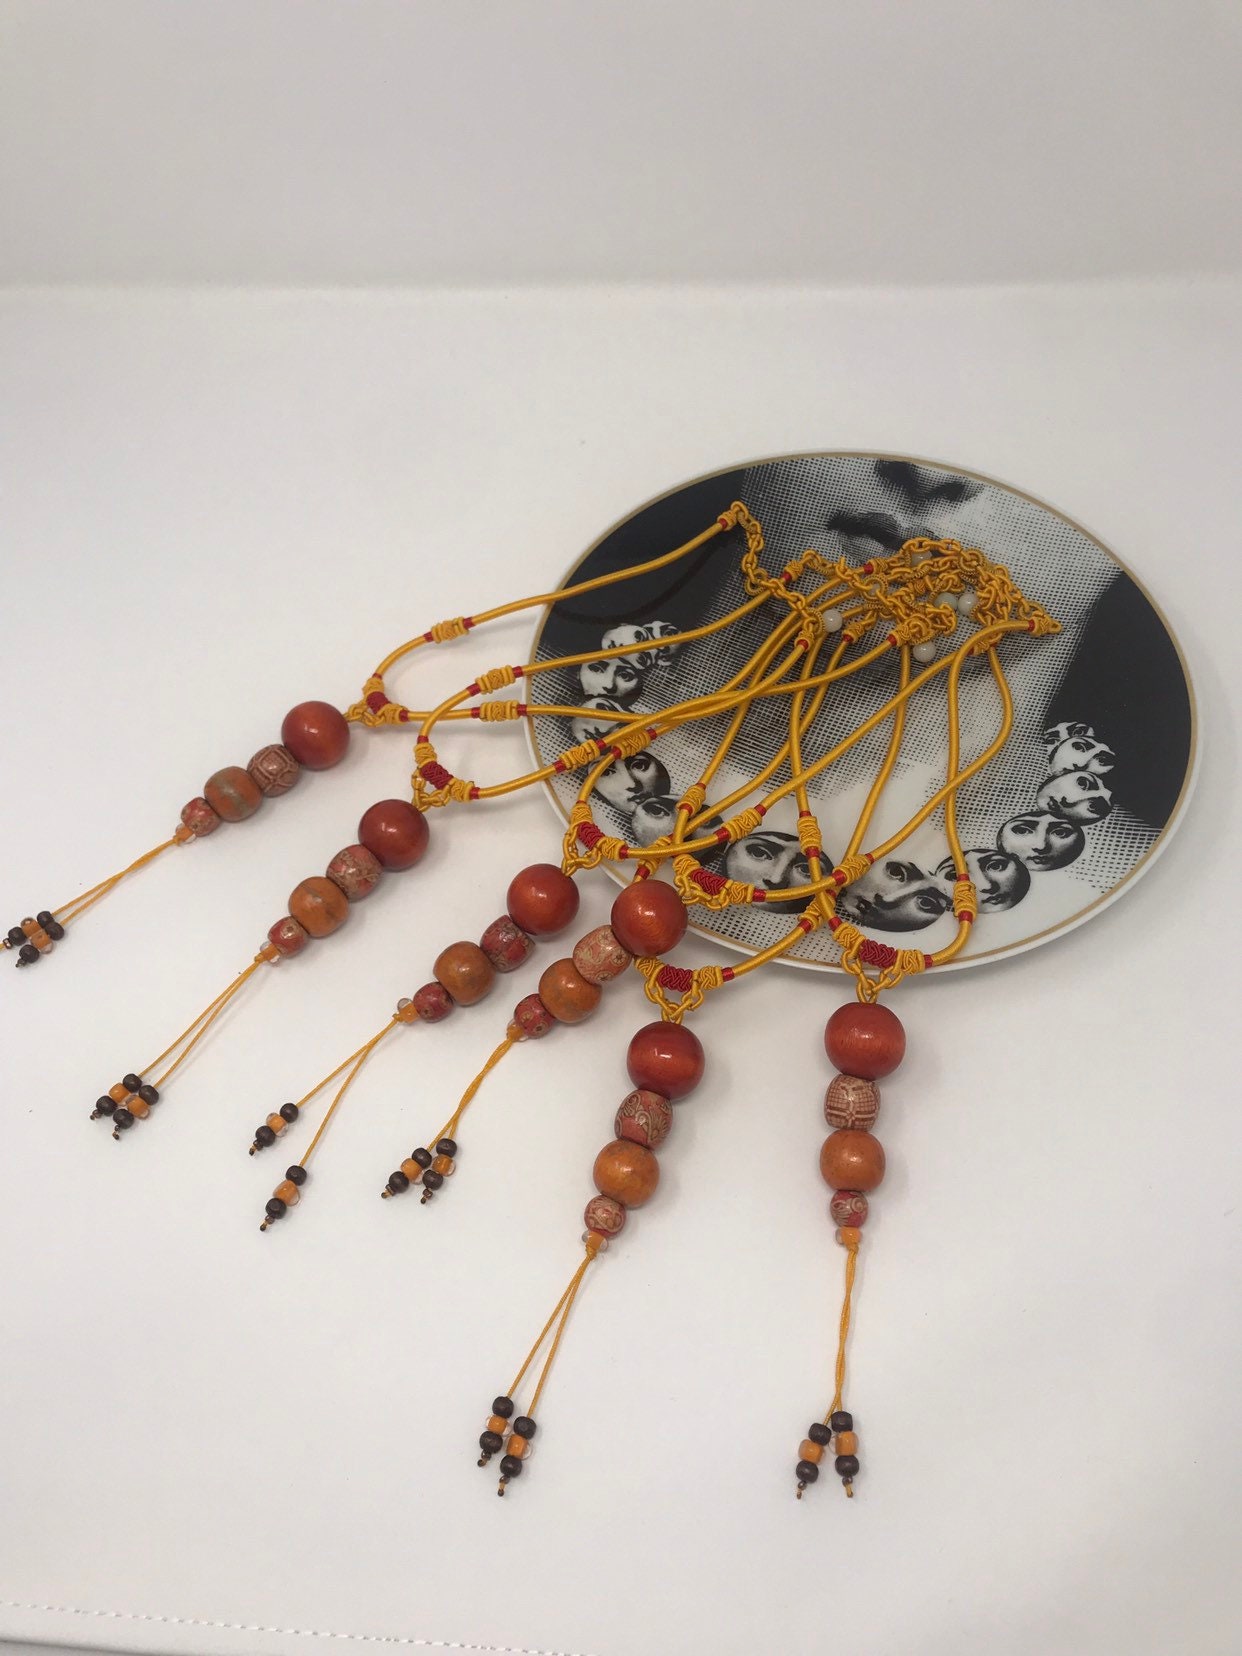 4 Strand Ceramic Beads Knotted Cord Necklace, Orange/Mustard